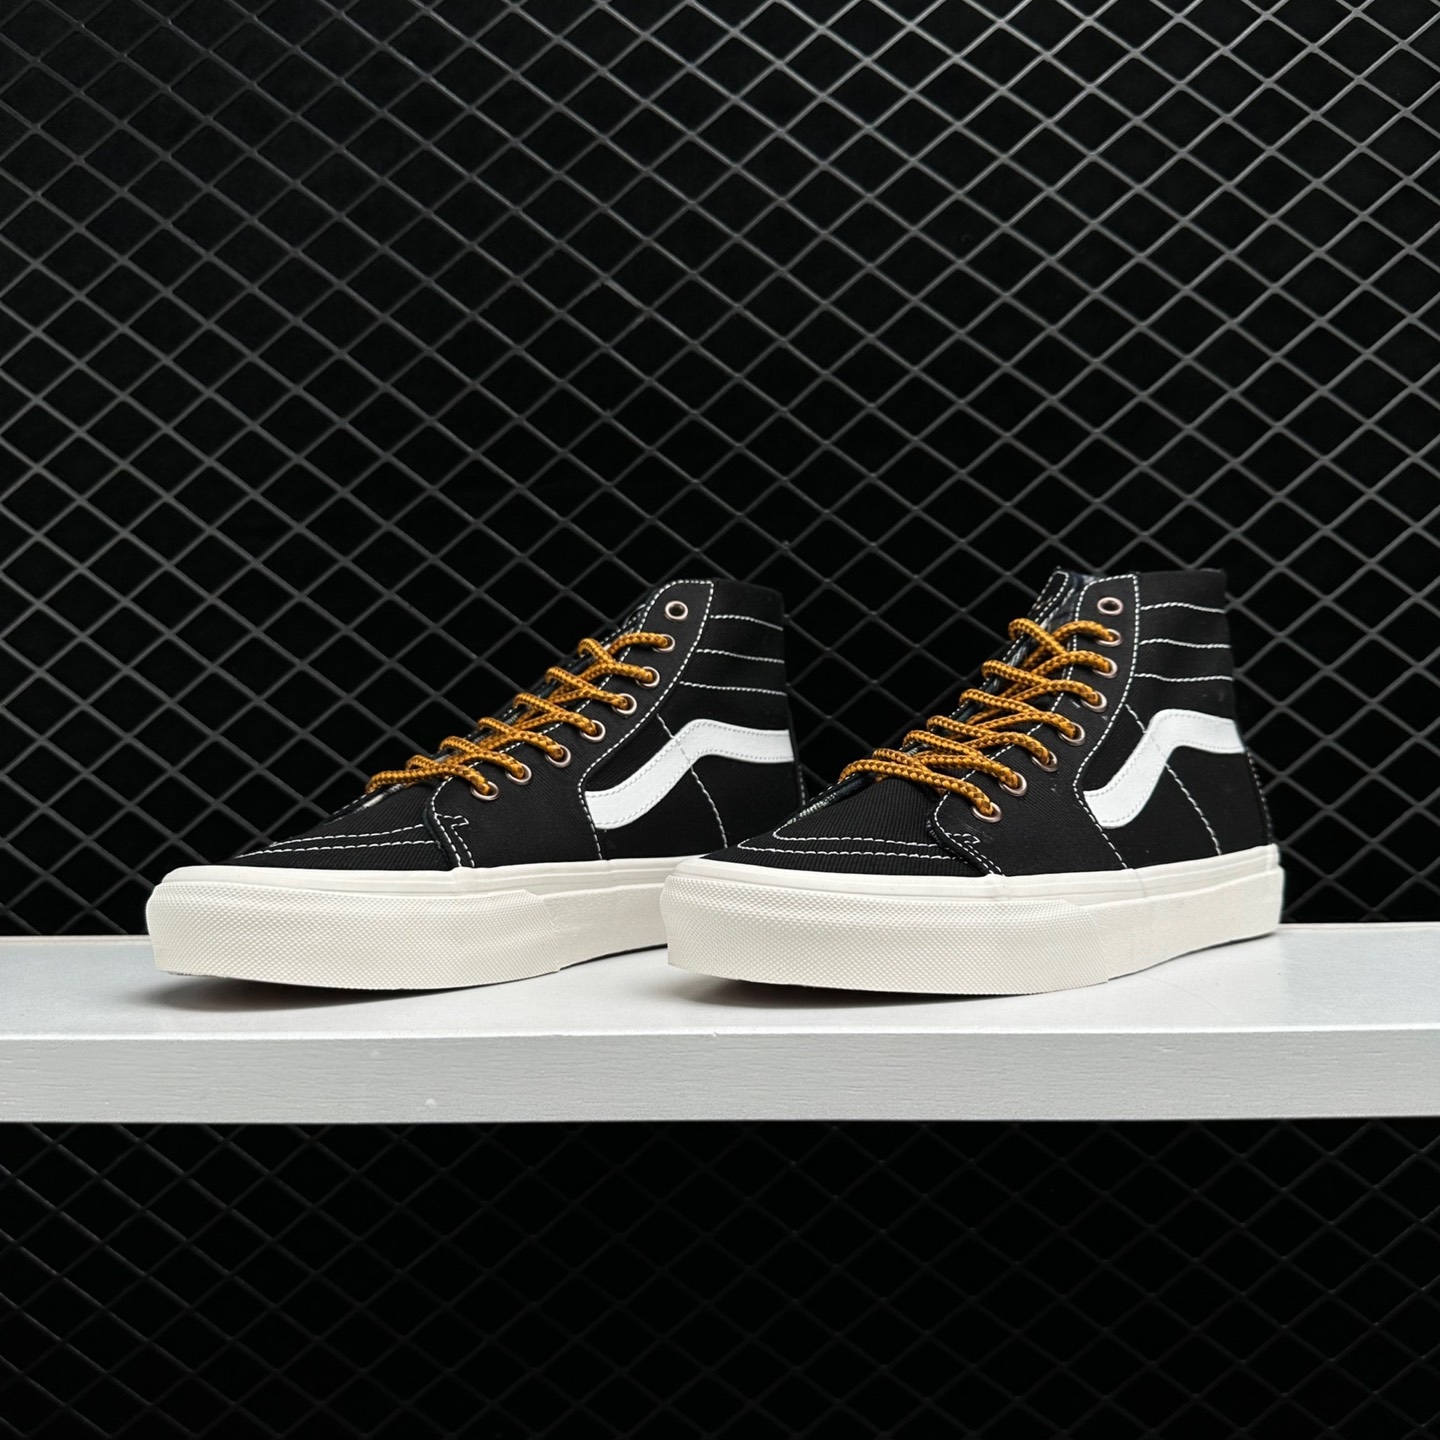 Vans SK8-HI Ca Throwback 'Black Yellow' - Trendy Sneakers for Style Enthusiasts